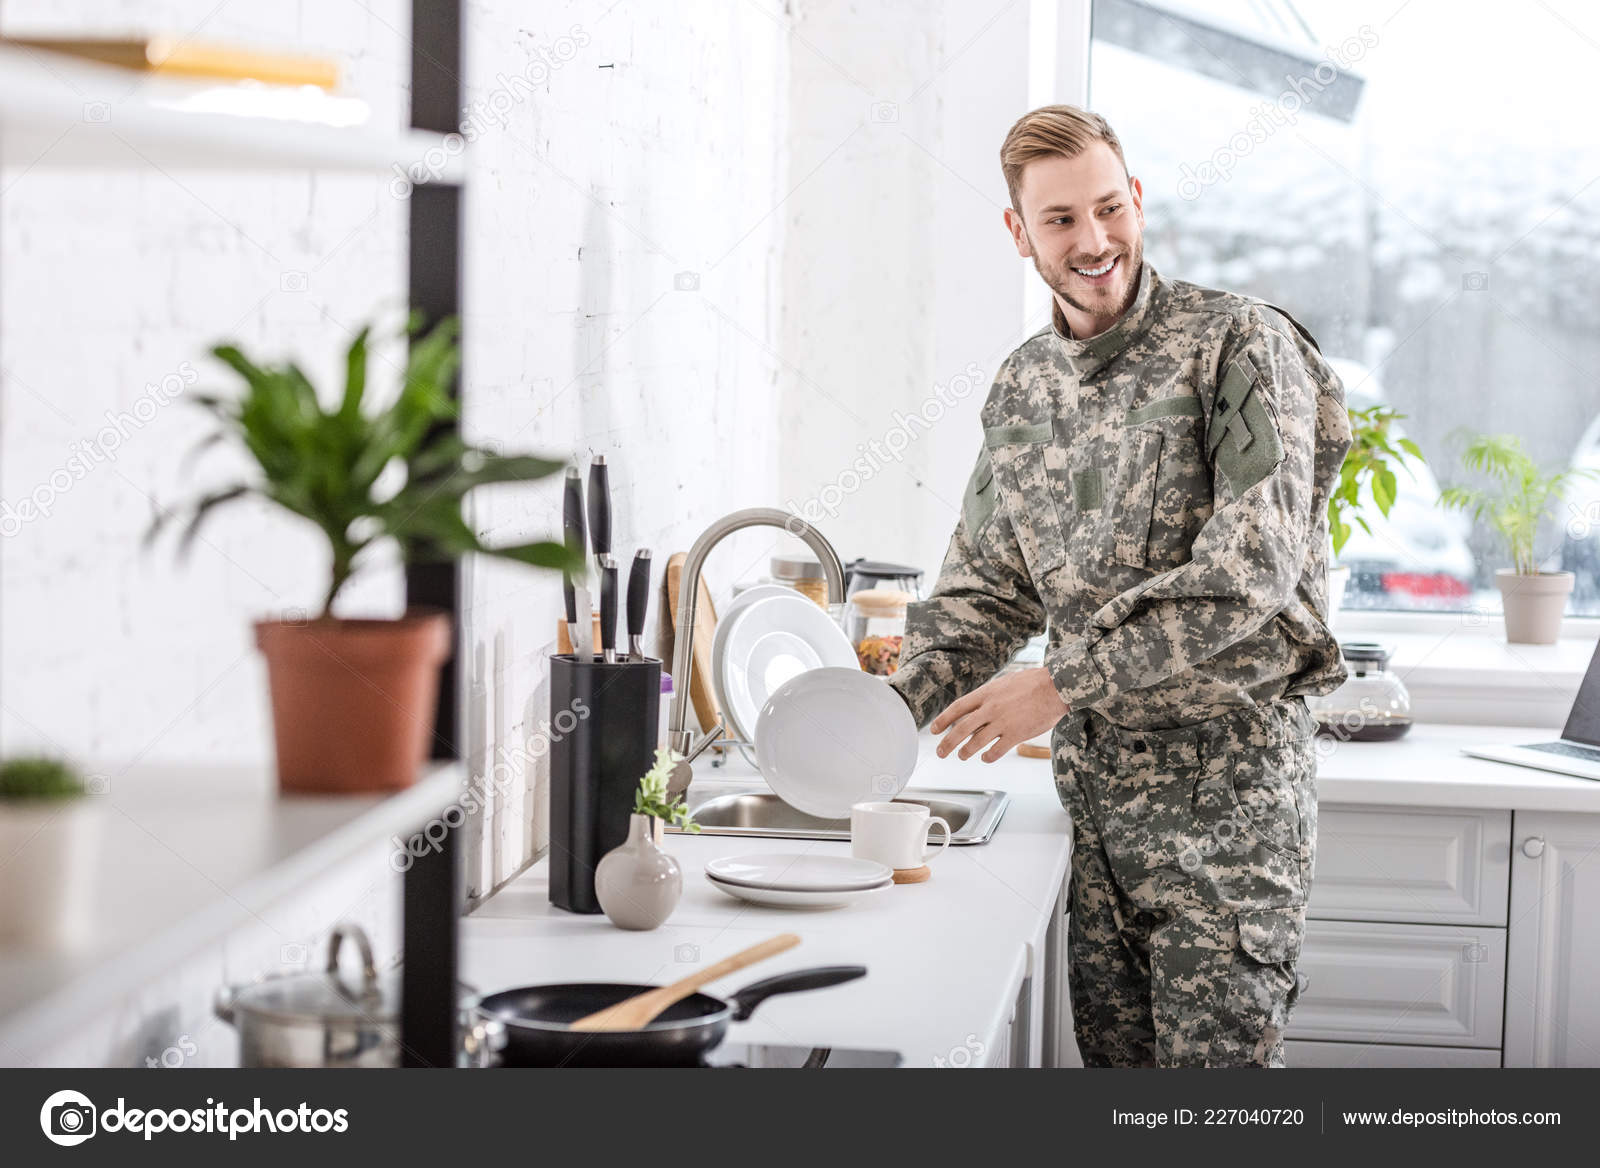 https://st4.depositphotos.com/12985848/22704/i/1600/depositphotos_227040720-stock-photo-smiling-army-soldier-cleaning-dishes.jpg